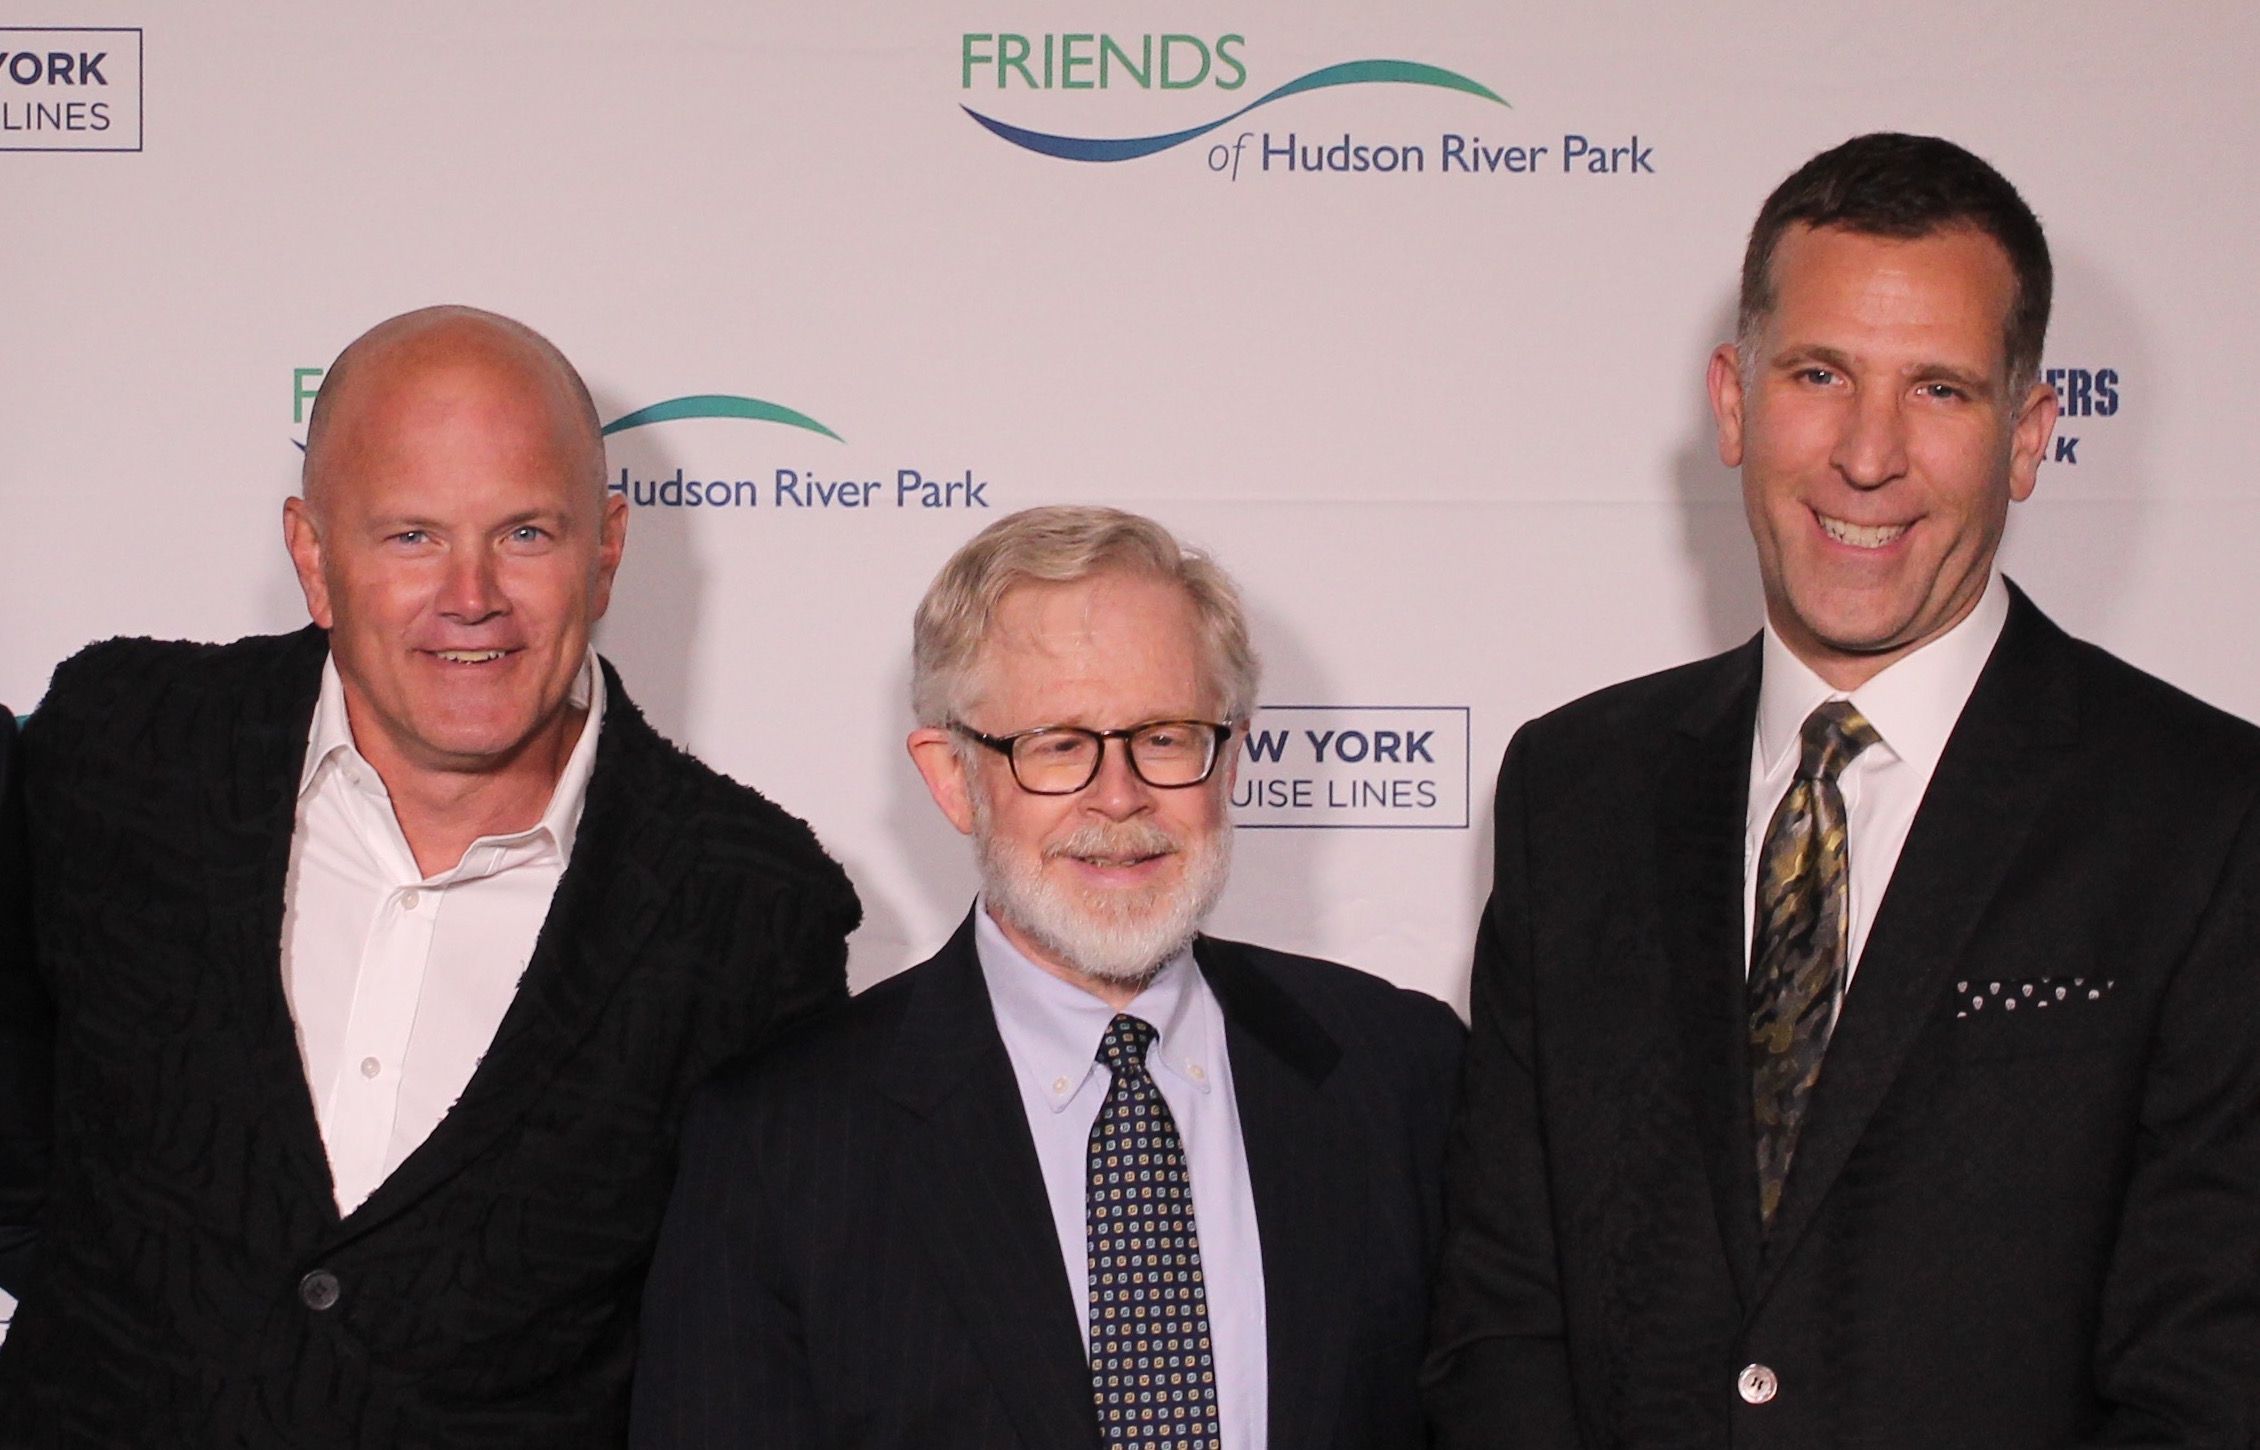 At the 2016 Friends of Hudson River Park Gala at Chelsea Piers, from left, Mike Novogratz, chairperson of the Friends' board of directors, Assemblymember Richard Gottfried and Scott Lawin, the vice chairperson of the Friends. Photo by Lincoln Anderson